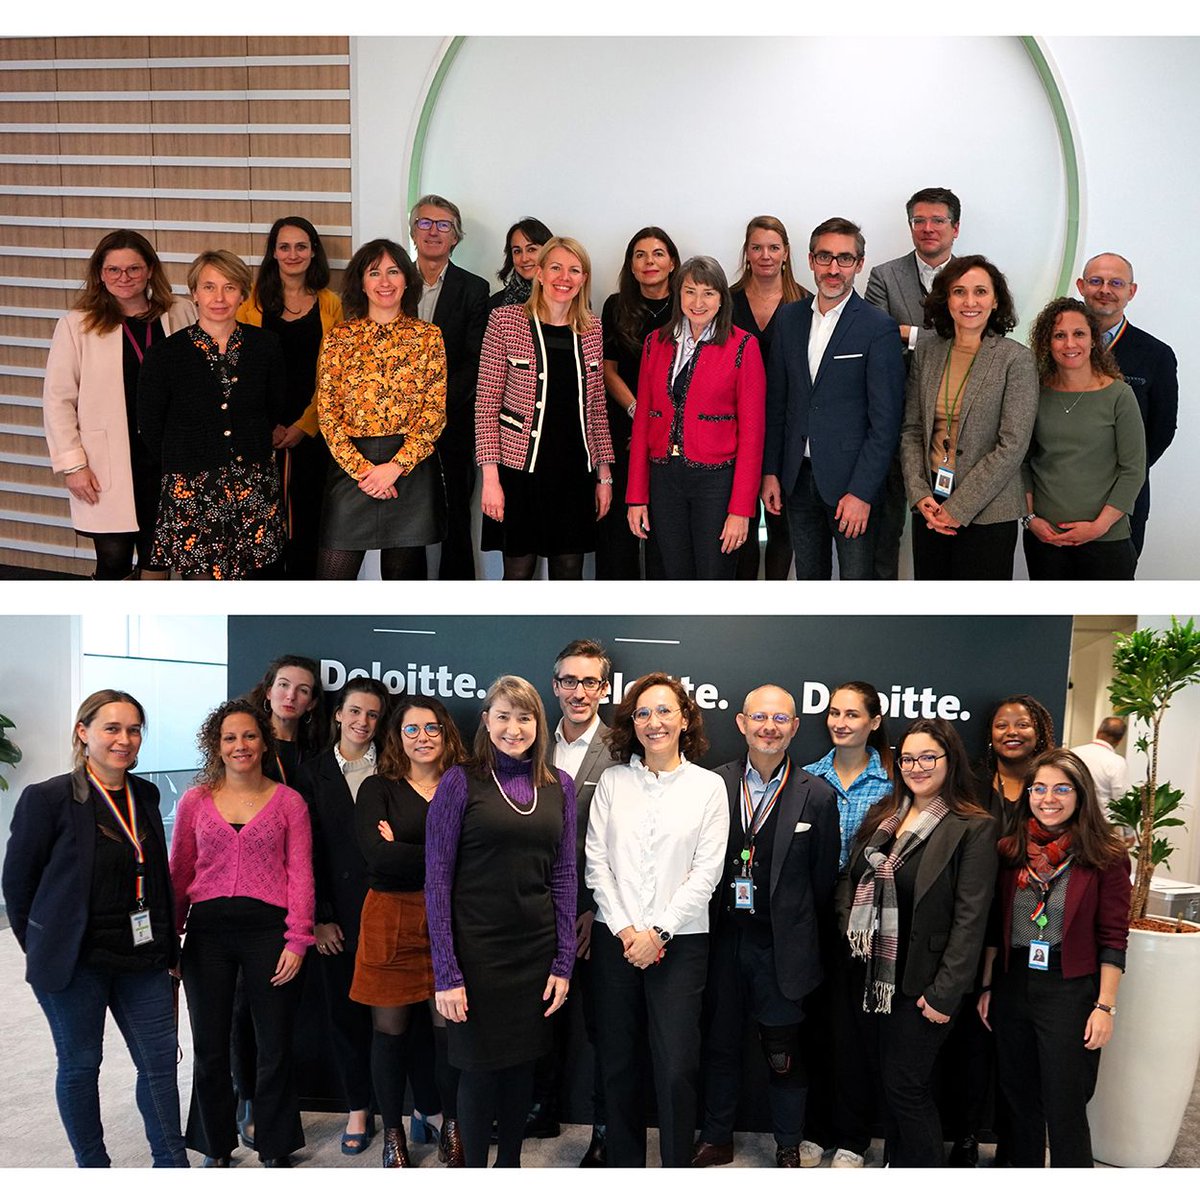 Wonderful to spend time with colleagues in France this week to discuss important topics like #MentalHealth, #WomenInLeadership, #mobility, and #learning. Always great to connect and engage with our teams across the globe. @emmajcodd @VeroniqueViolin @G_Monsellato